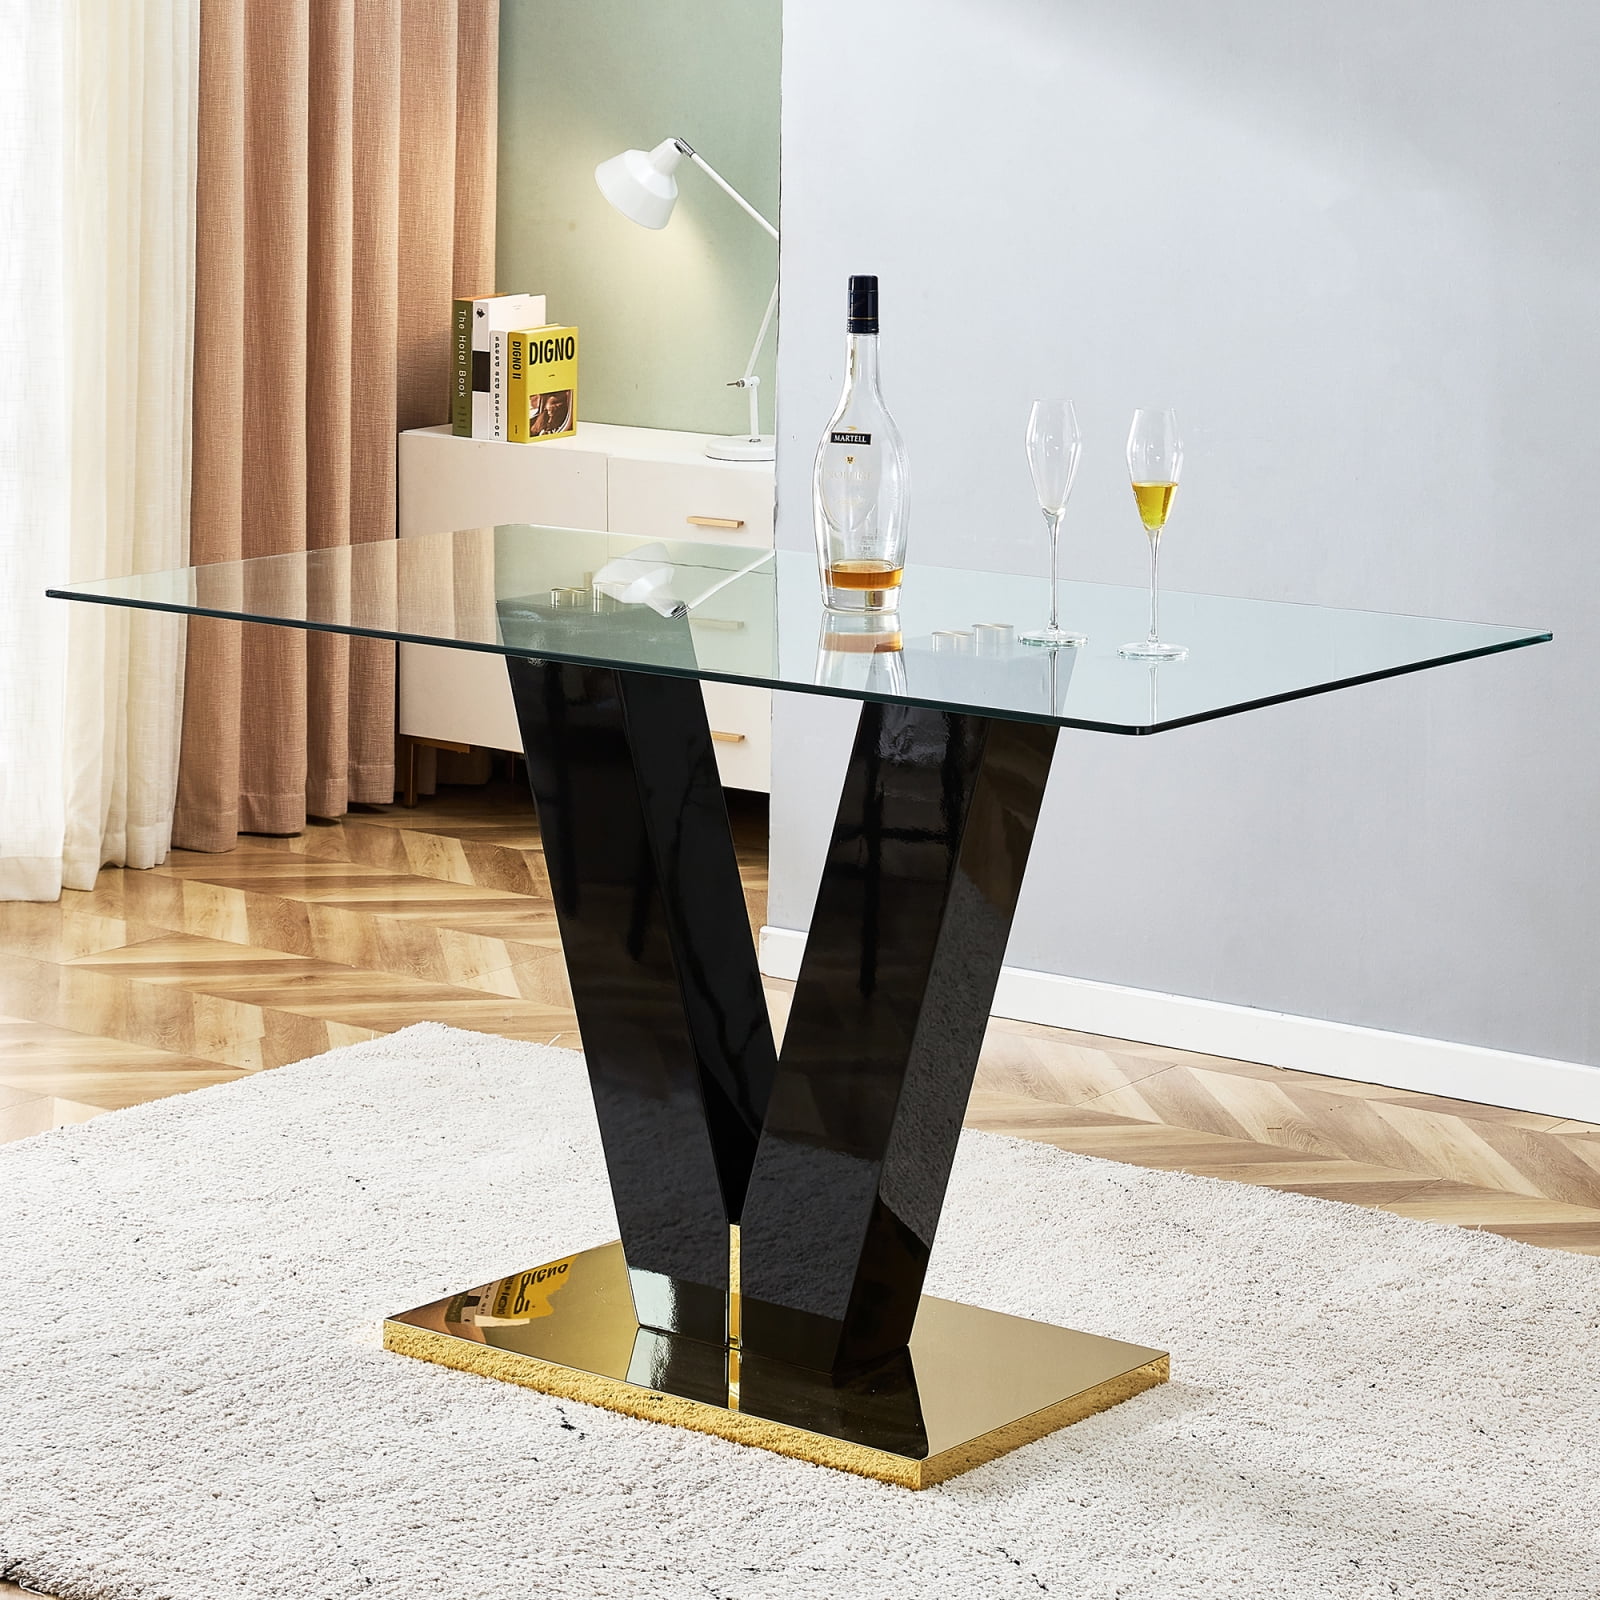 Large Contemporary Glass Dining Table for 6-8 People, 0.39-inch Tempered Glass Tabletop, MDF Slab V-Shaped Bracket, Perfect for Kitchen, Dining, Living, Meeting Room, and Banquet Hall -Brand New